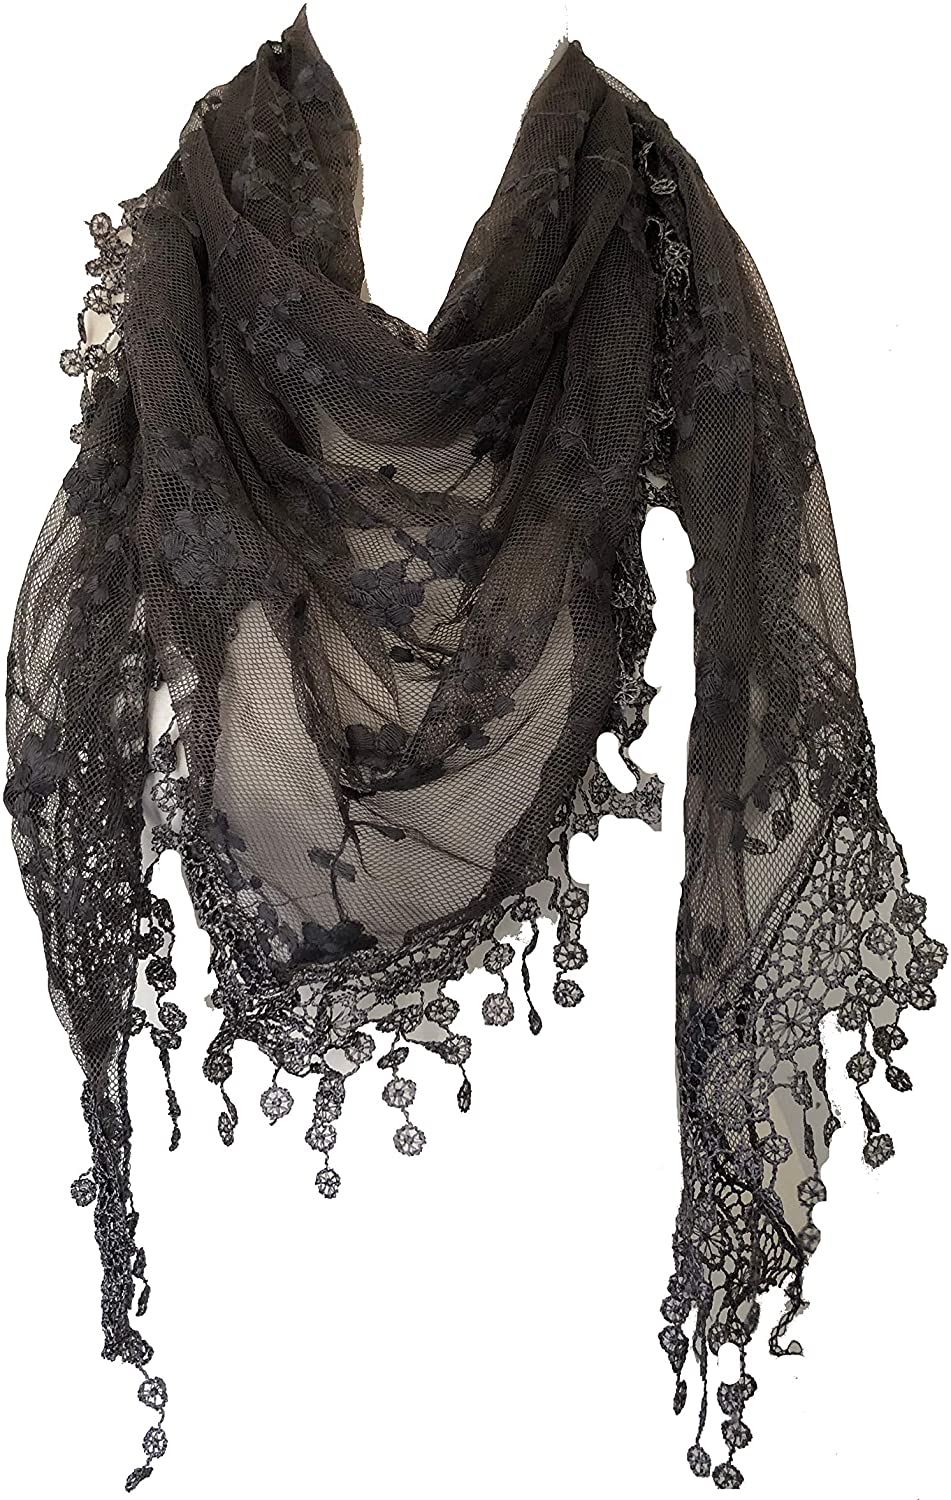 Pamper Yourself Now Dark Grey Small Flower lace Triangle Scarf. a Lovely Fashion Item. Fantastic Gift